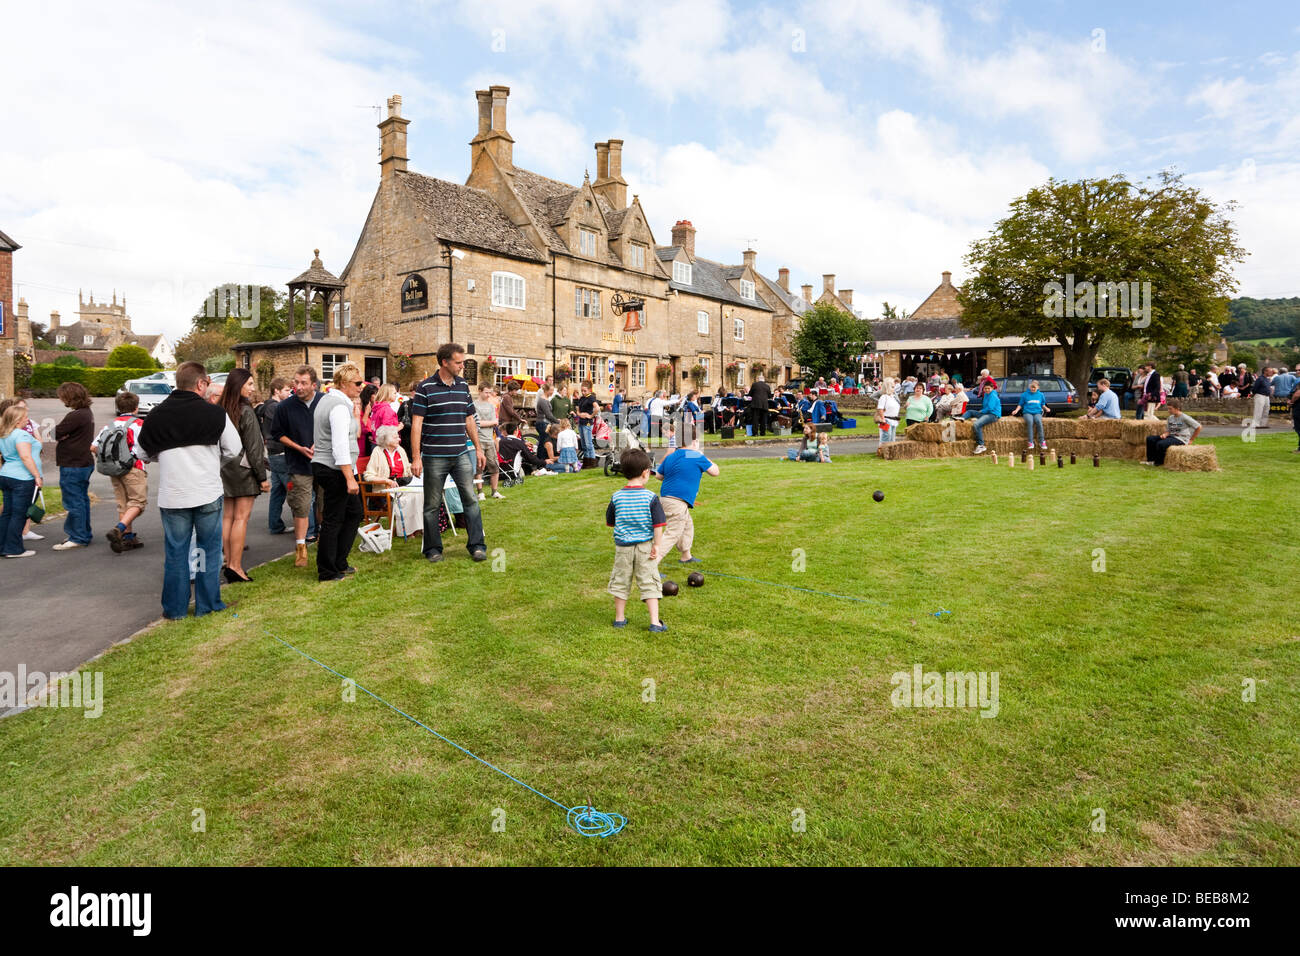 Playing skittles on the village green on August Bank Holiday Monday in the Cotswold village of Willersey, Gloucestershire UK Stock Photo